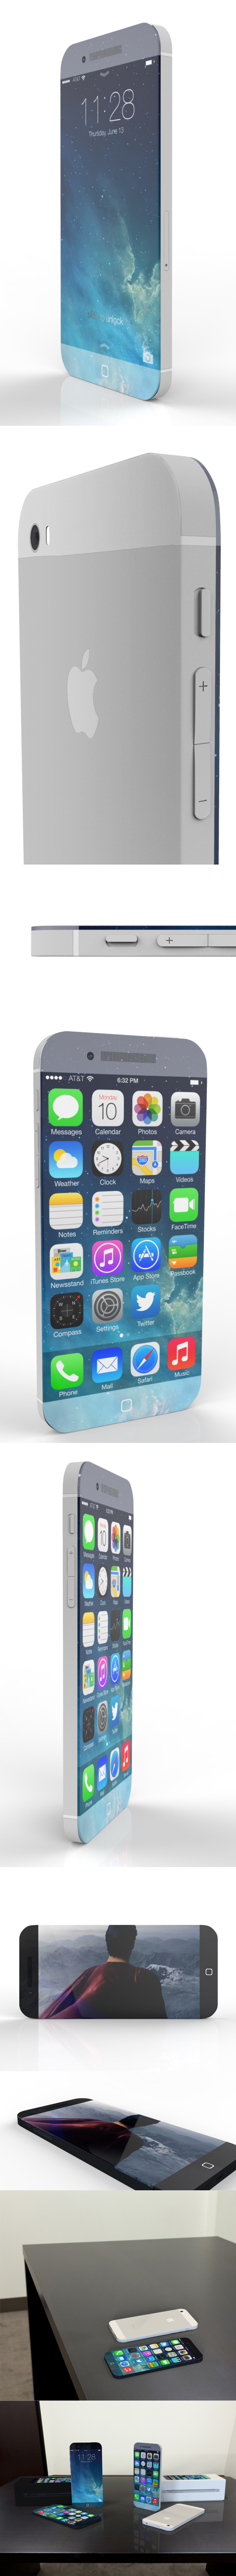 iphone iPhone6 concept 3dsmax MAX 3ds after effects keyshot edge to Display apple iPhone 6 Concept